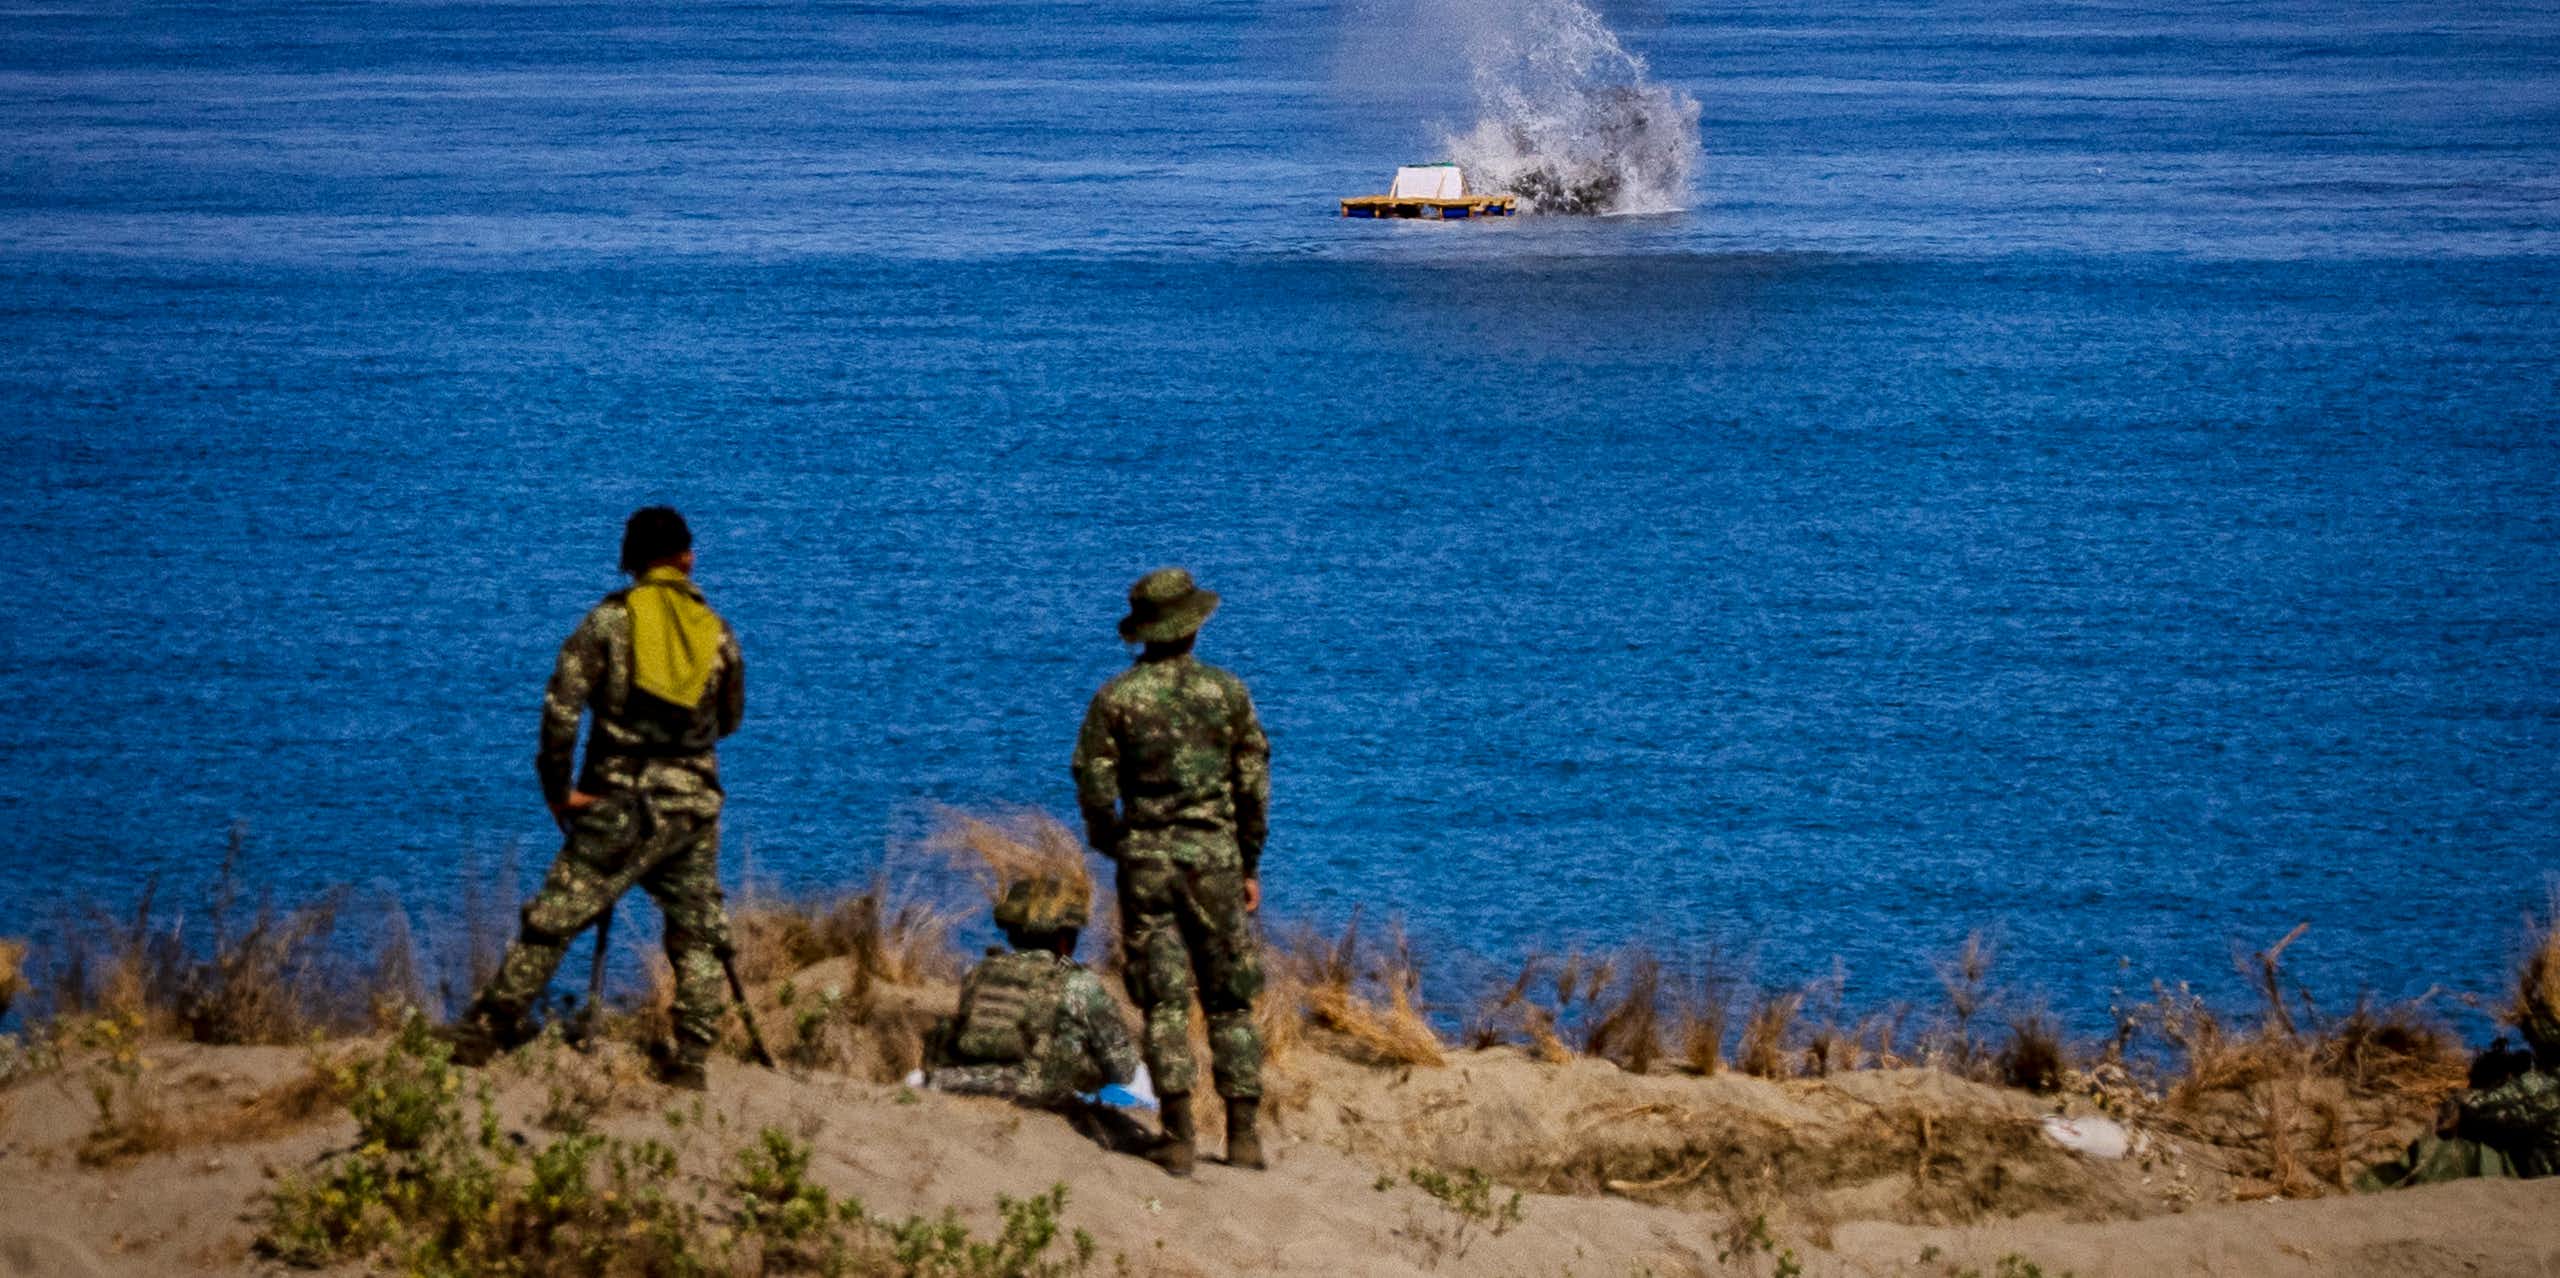 Men in fatigues stand and sit on a beach staring at a structure at sea which has smoke billowing from it.